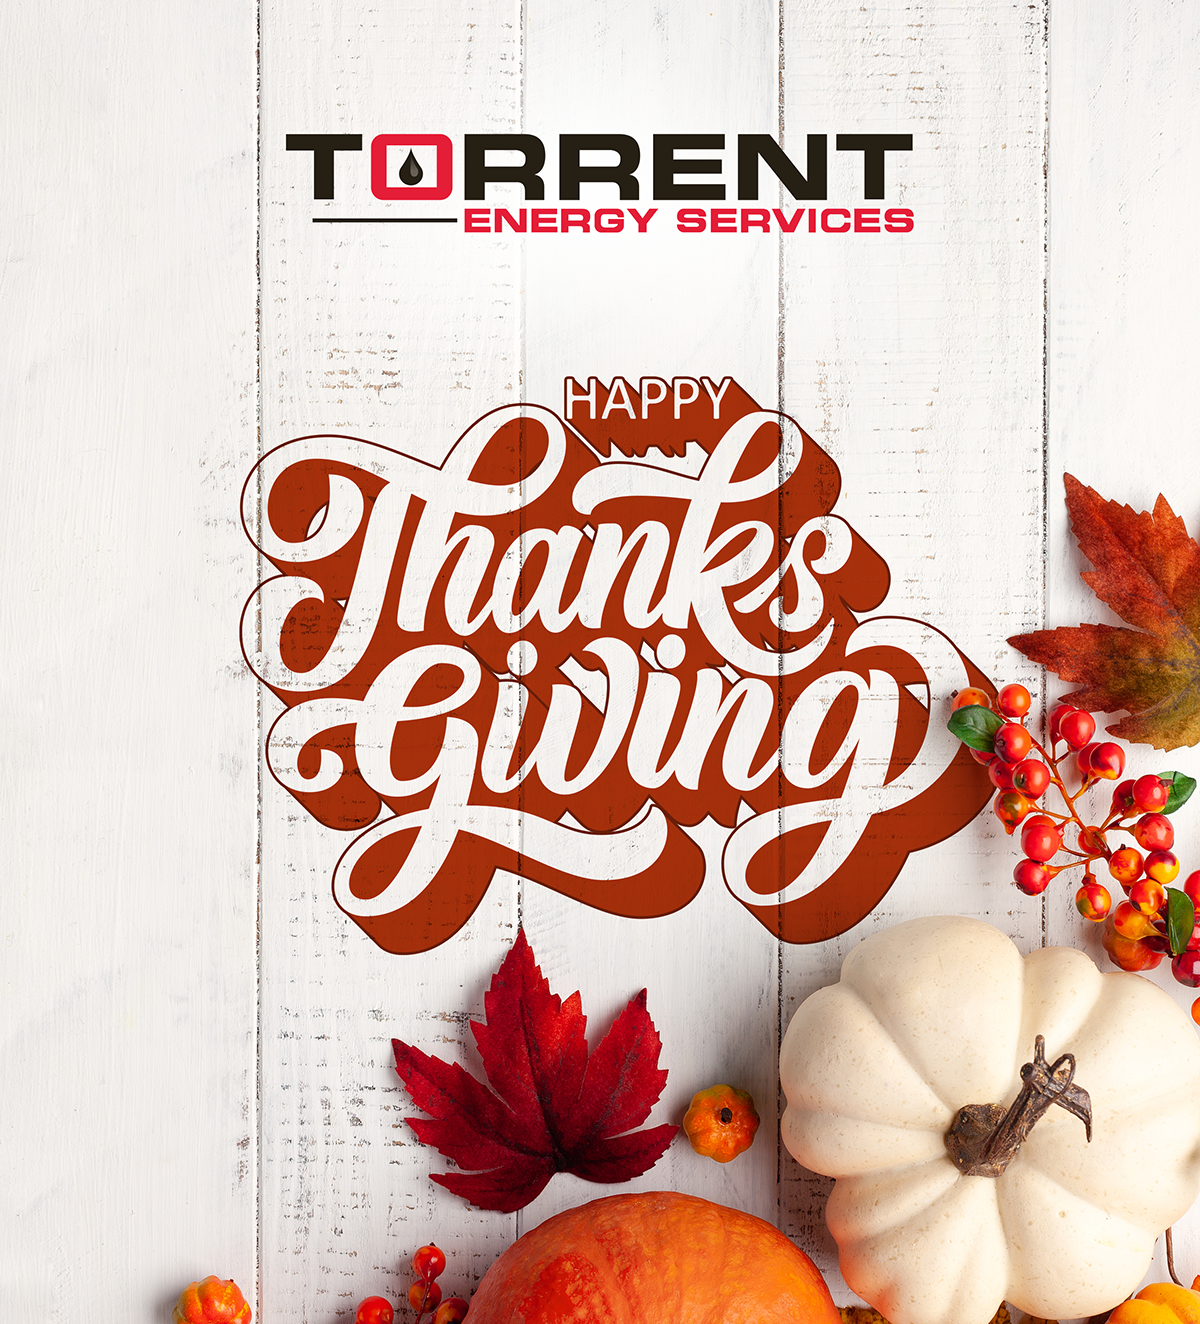 Happy Thanksgiving from Torrent Energy Services